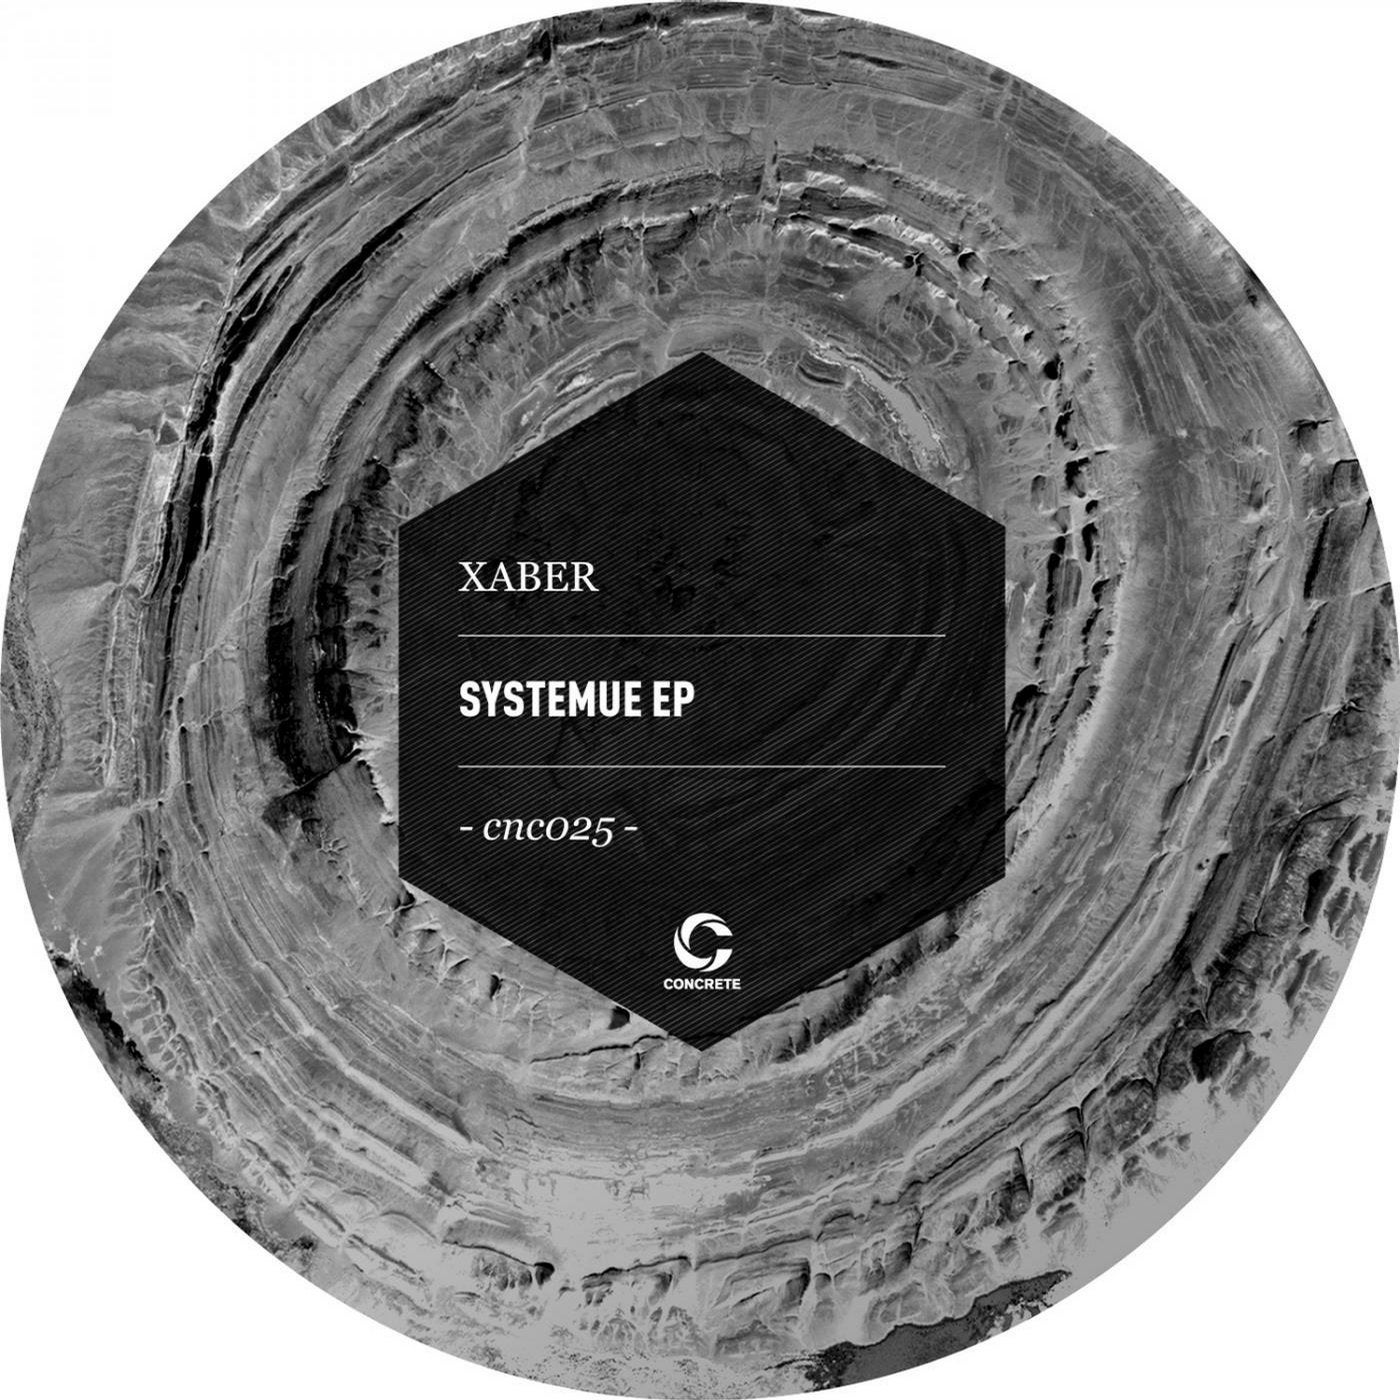 SYSTEMUE EP